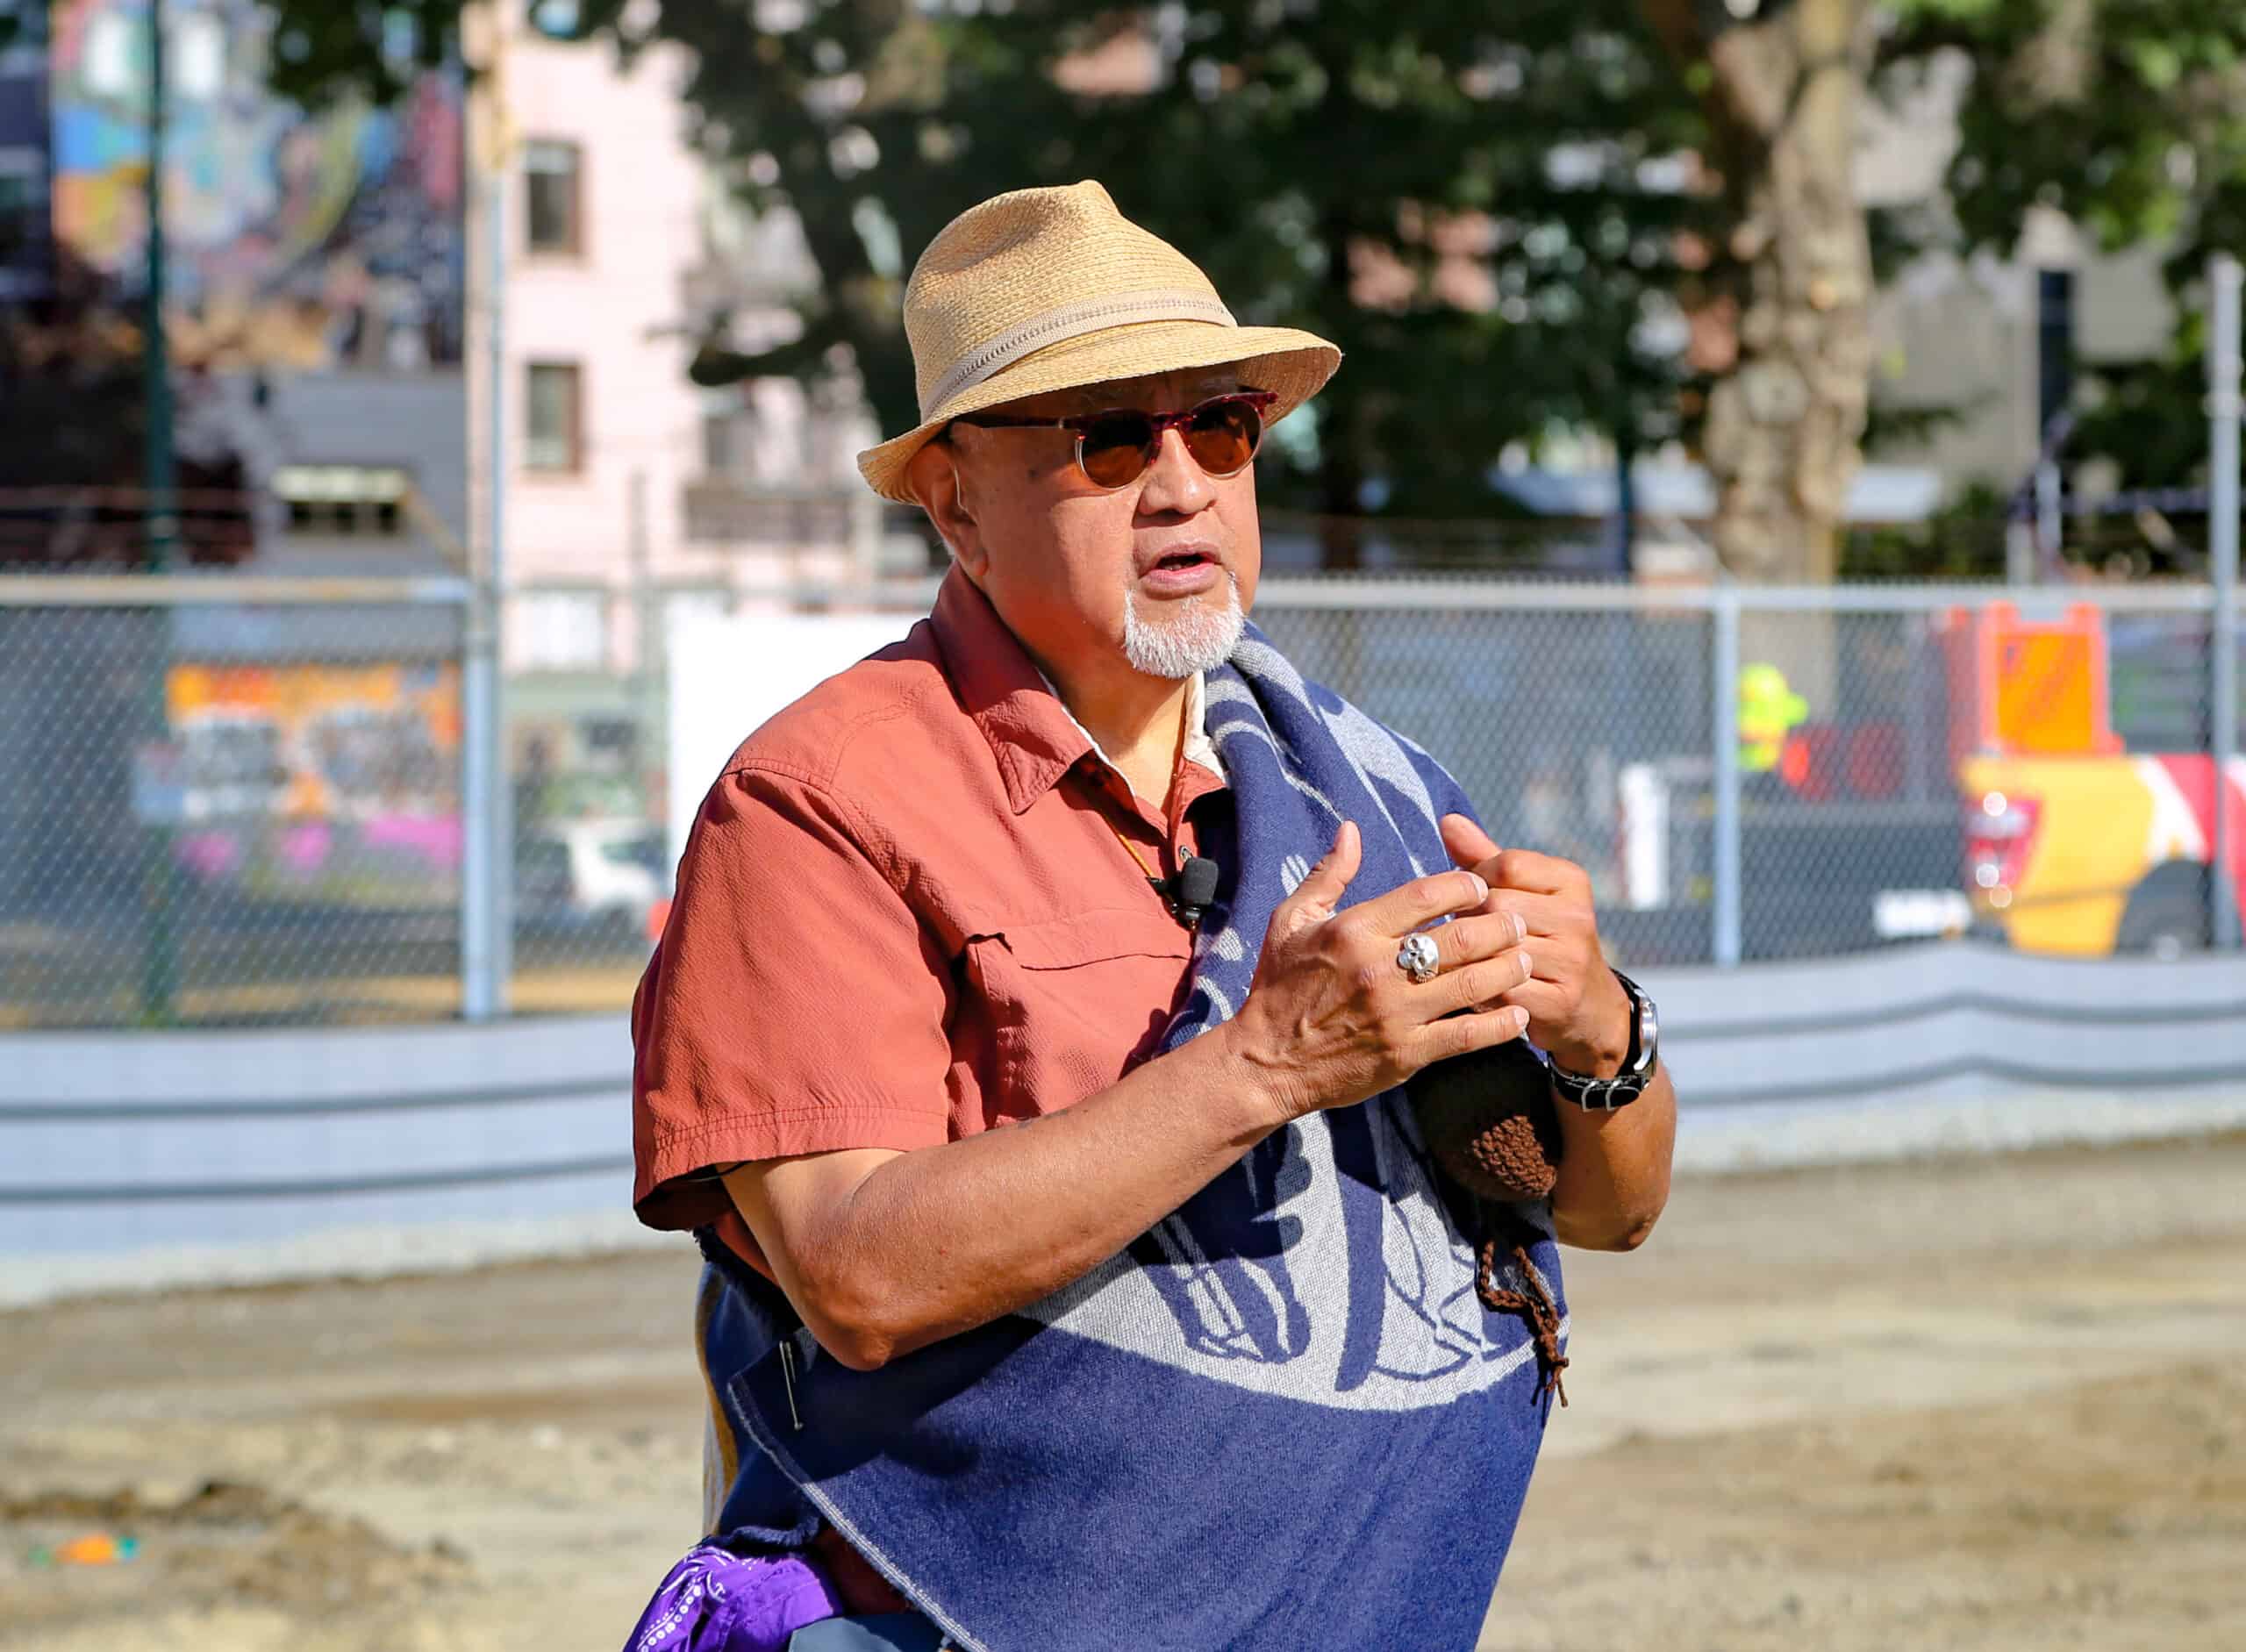 Sulksun (Shane Pointe), a Coast Salish Knowledge Keeper who resides in the 4,000-year-old village of Musqueam, led the cultural protocol to bless the site which will also be the future home of the Indigenous Wellness and Welcoming Centre a pivotal initative for Indigenous health care.